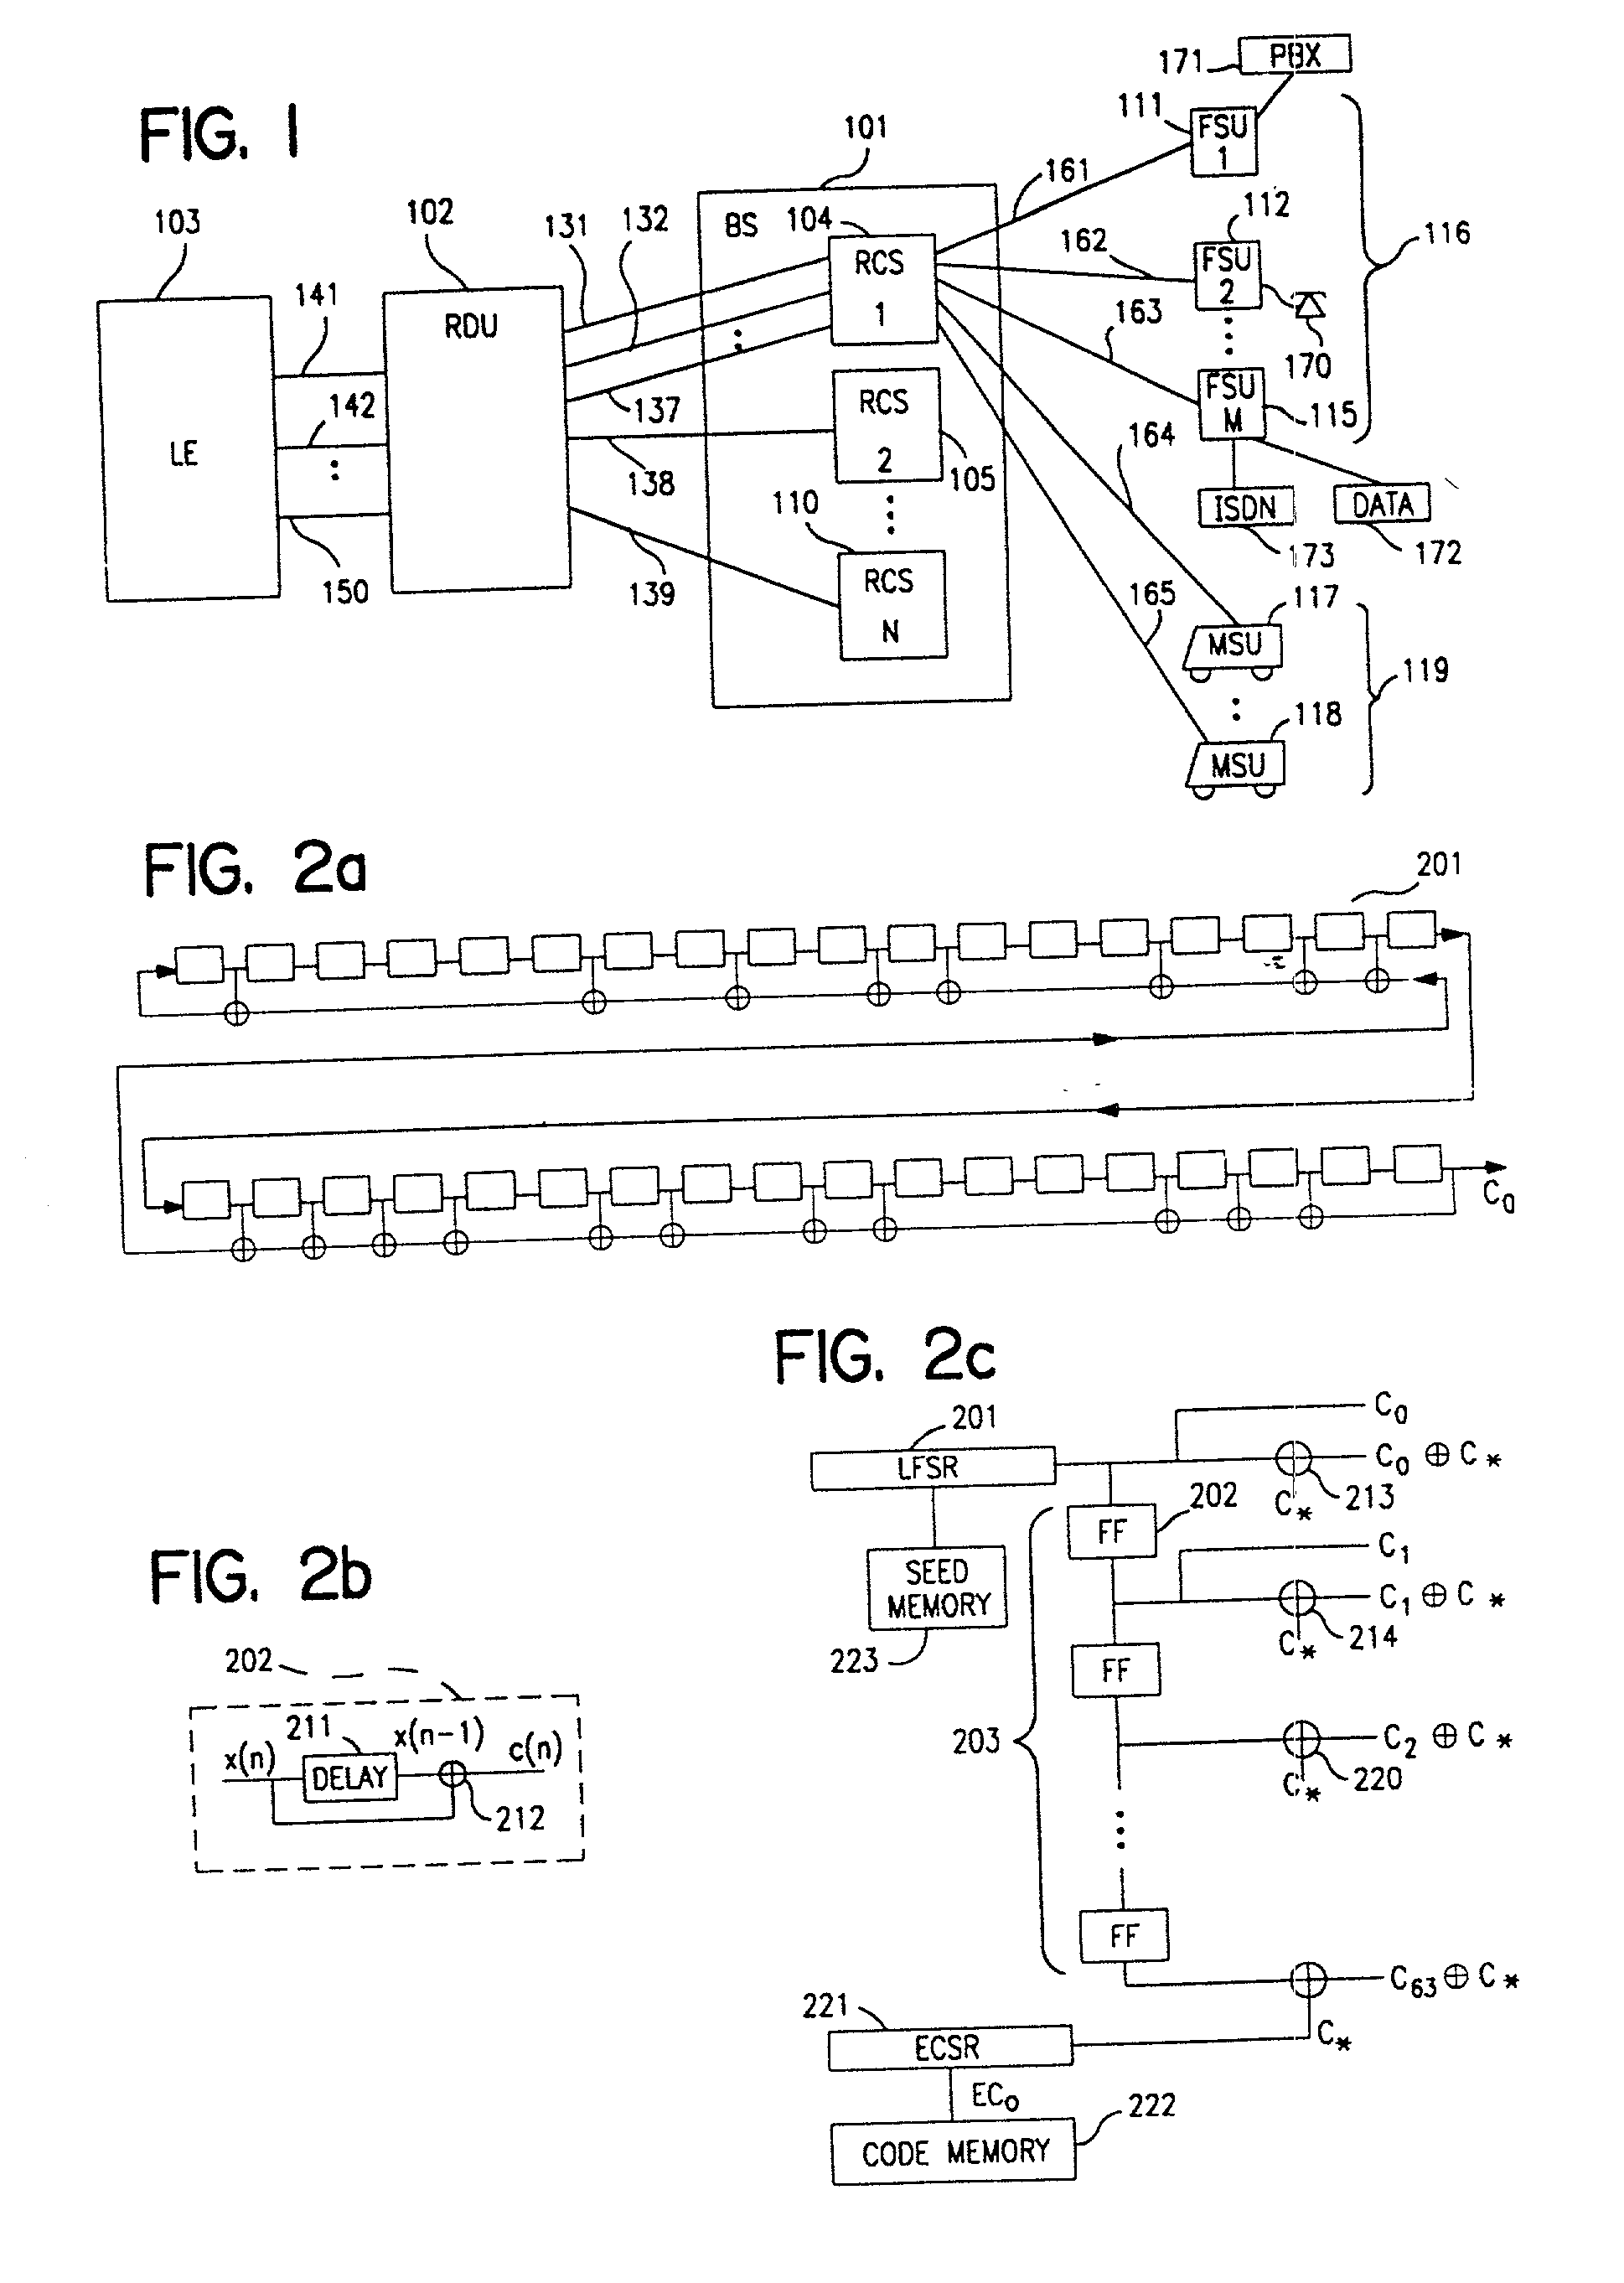 Apparatus for adaptive forward power control for spread-spectrum communications